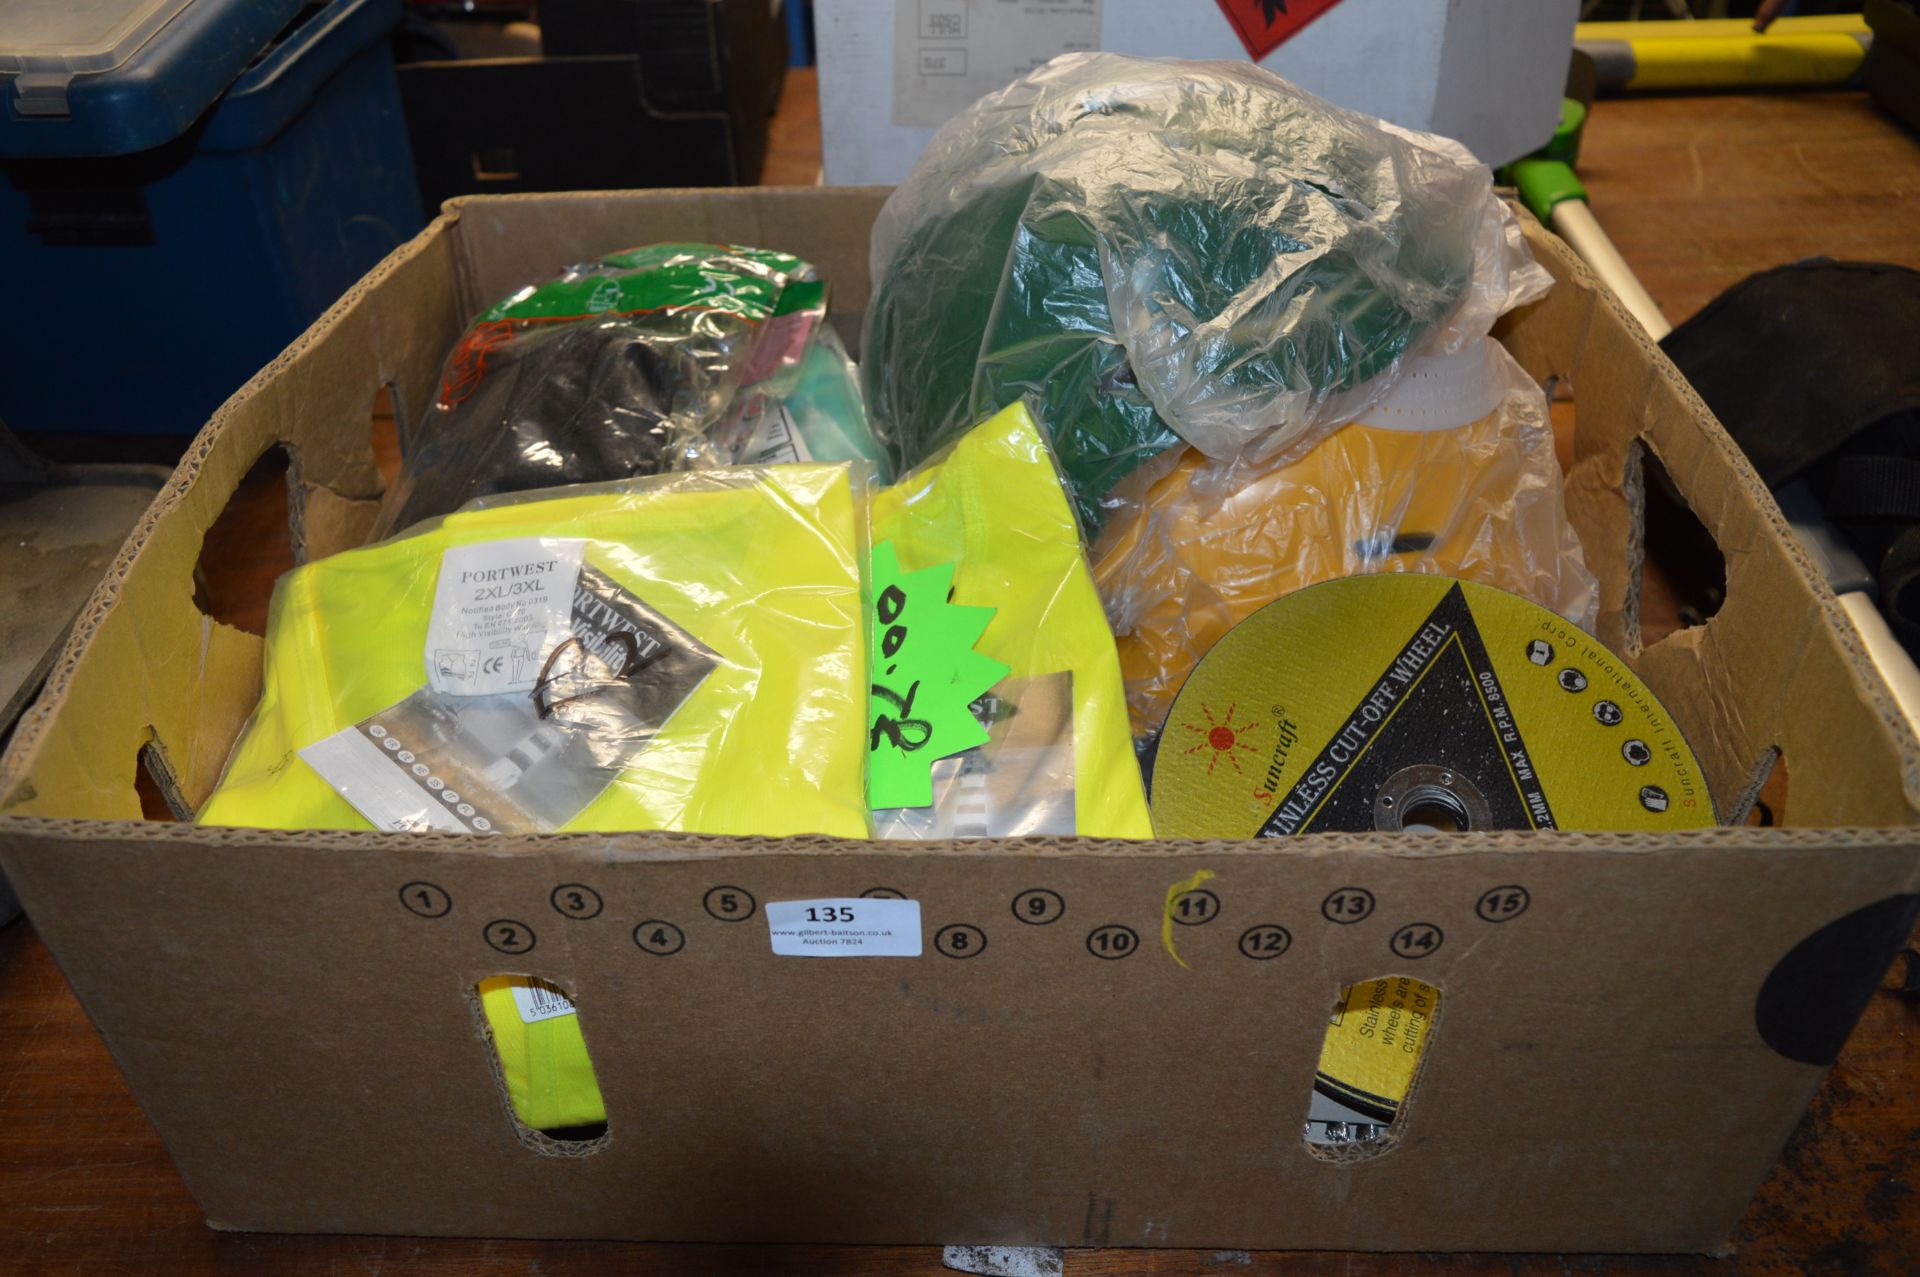 Box Containing Workers Hard Hats, Gloves, High Vis Vests and Cutting Disks